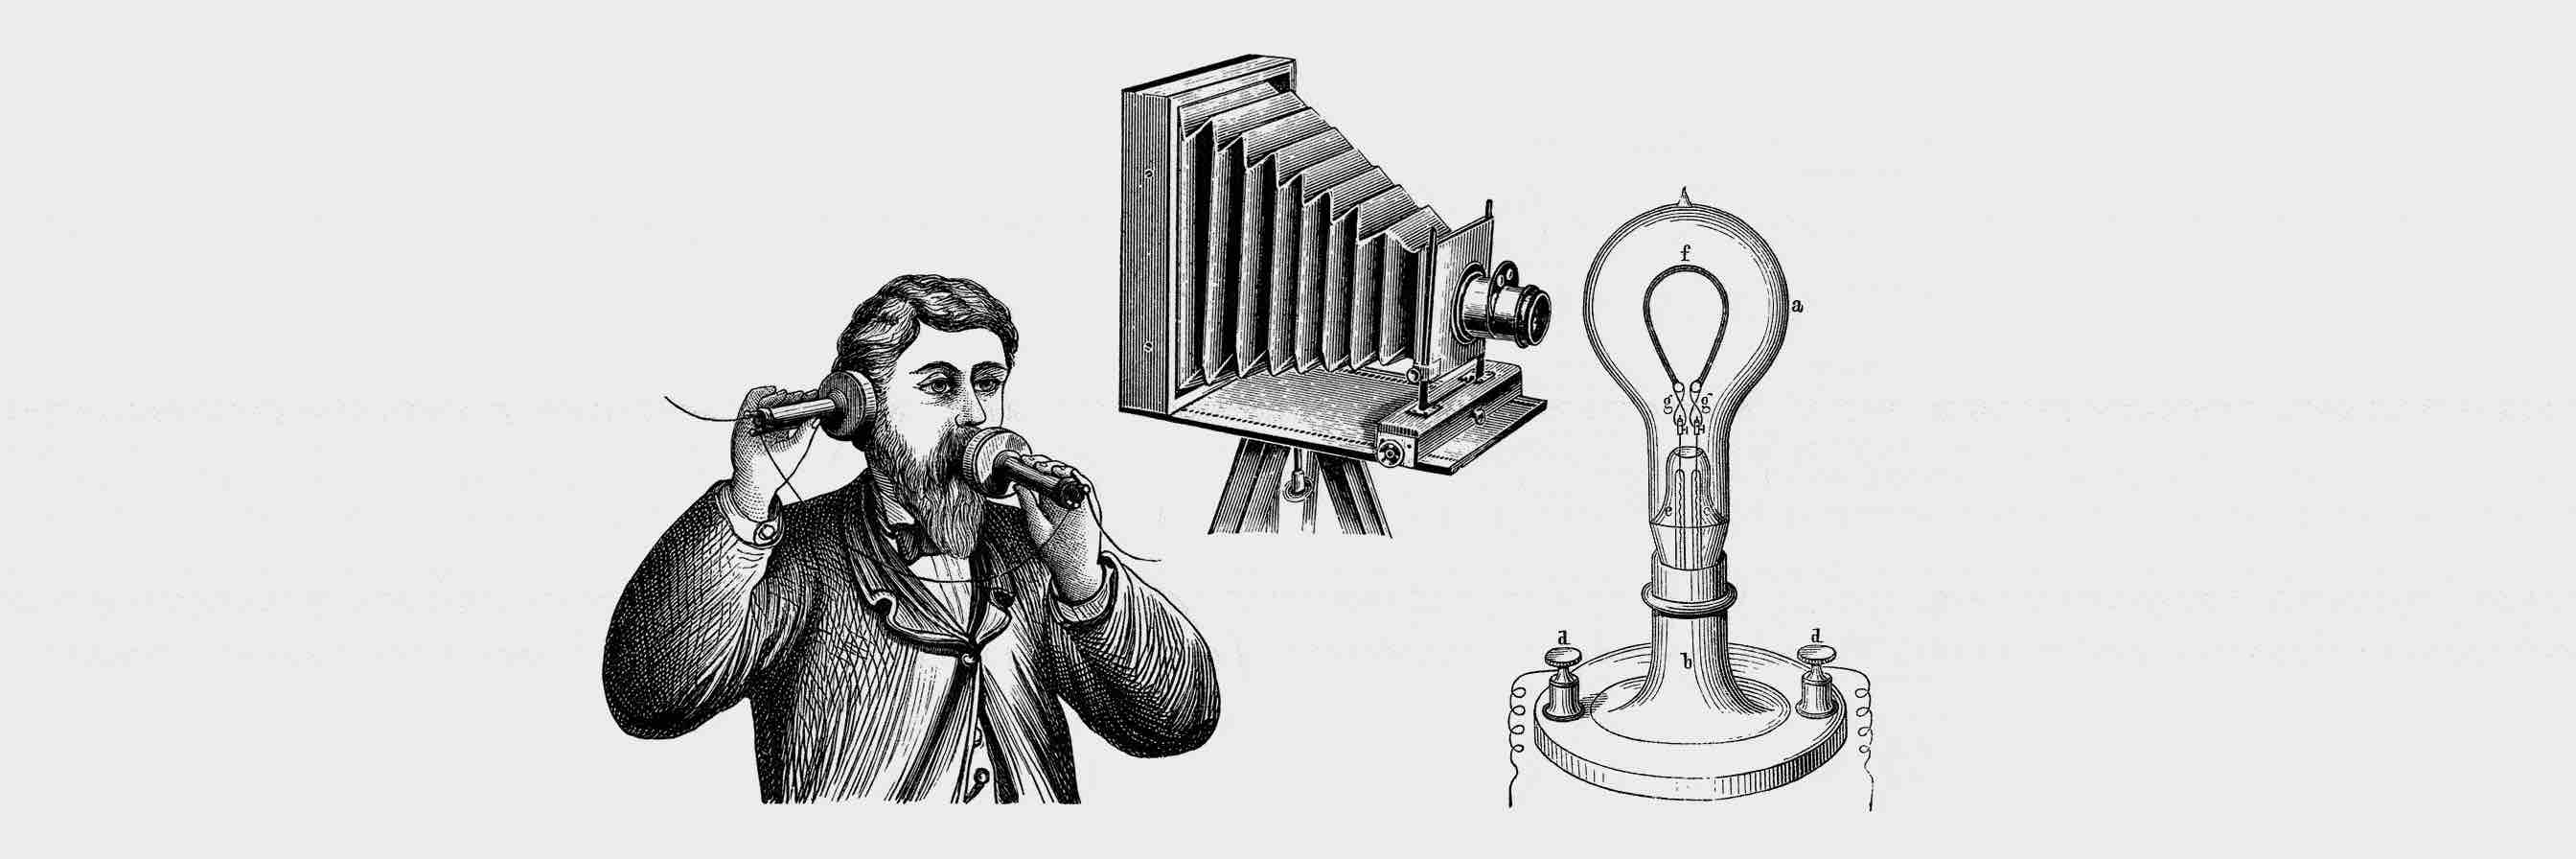 The inventions of the light bulb, camera and telephone